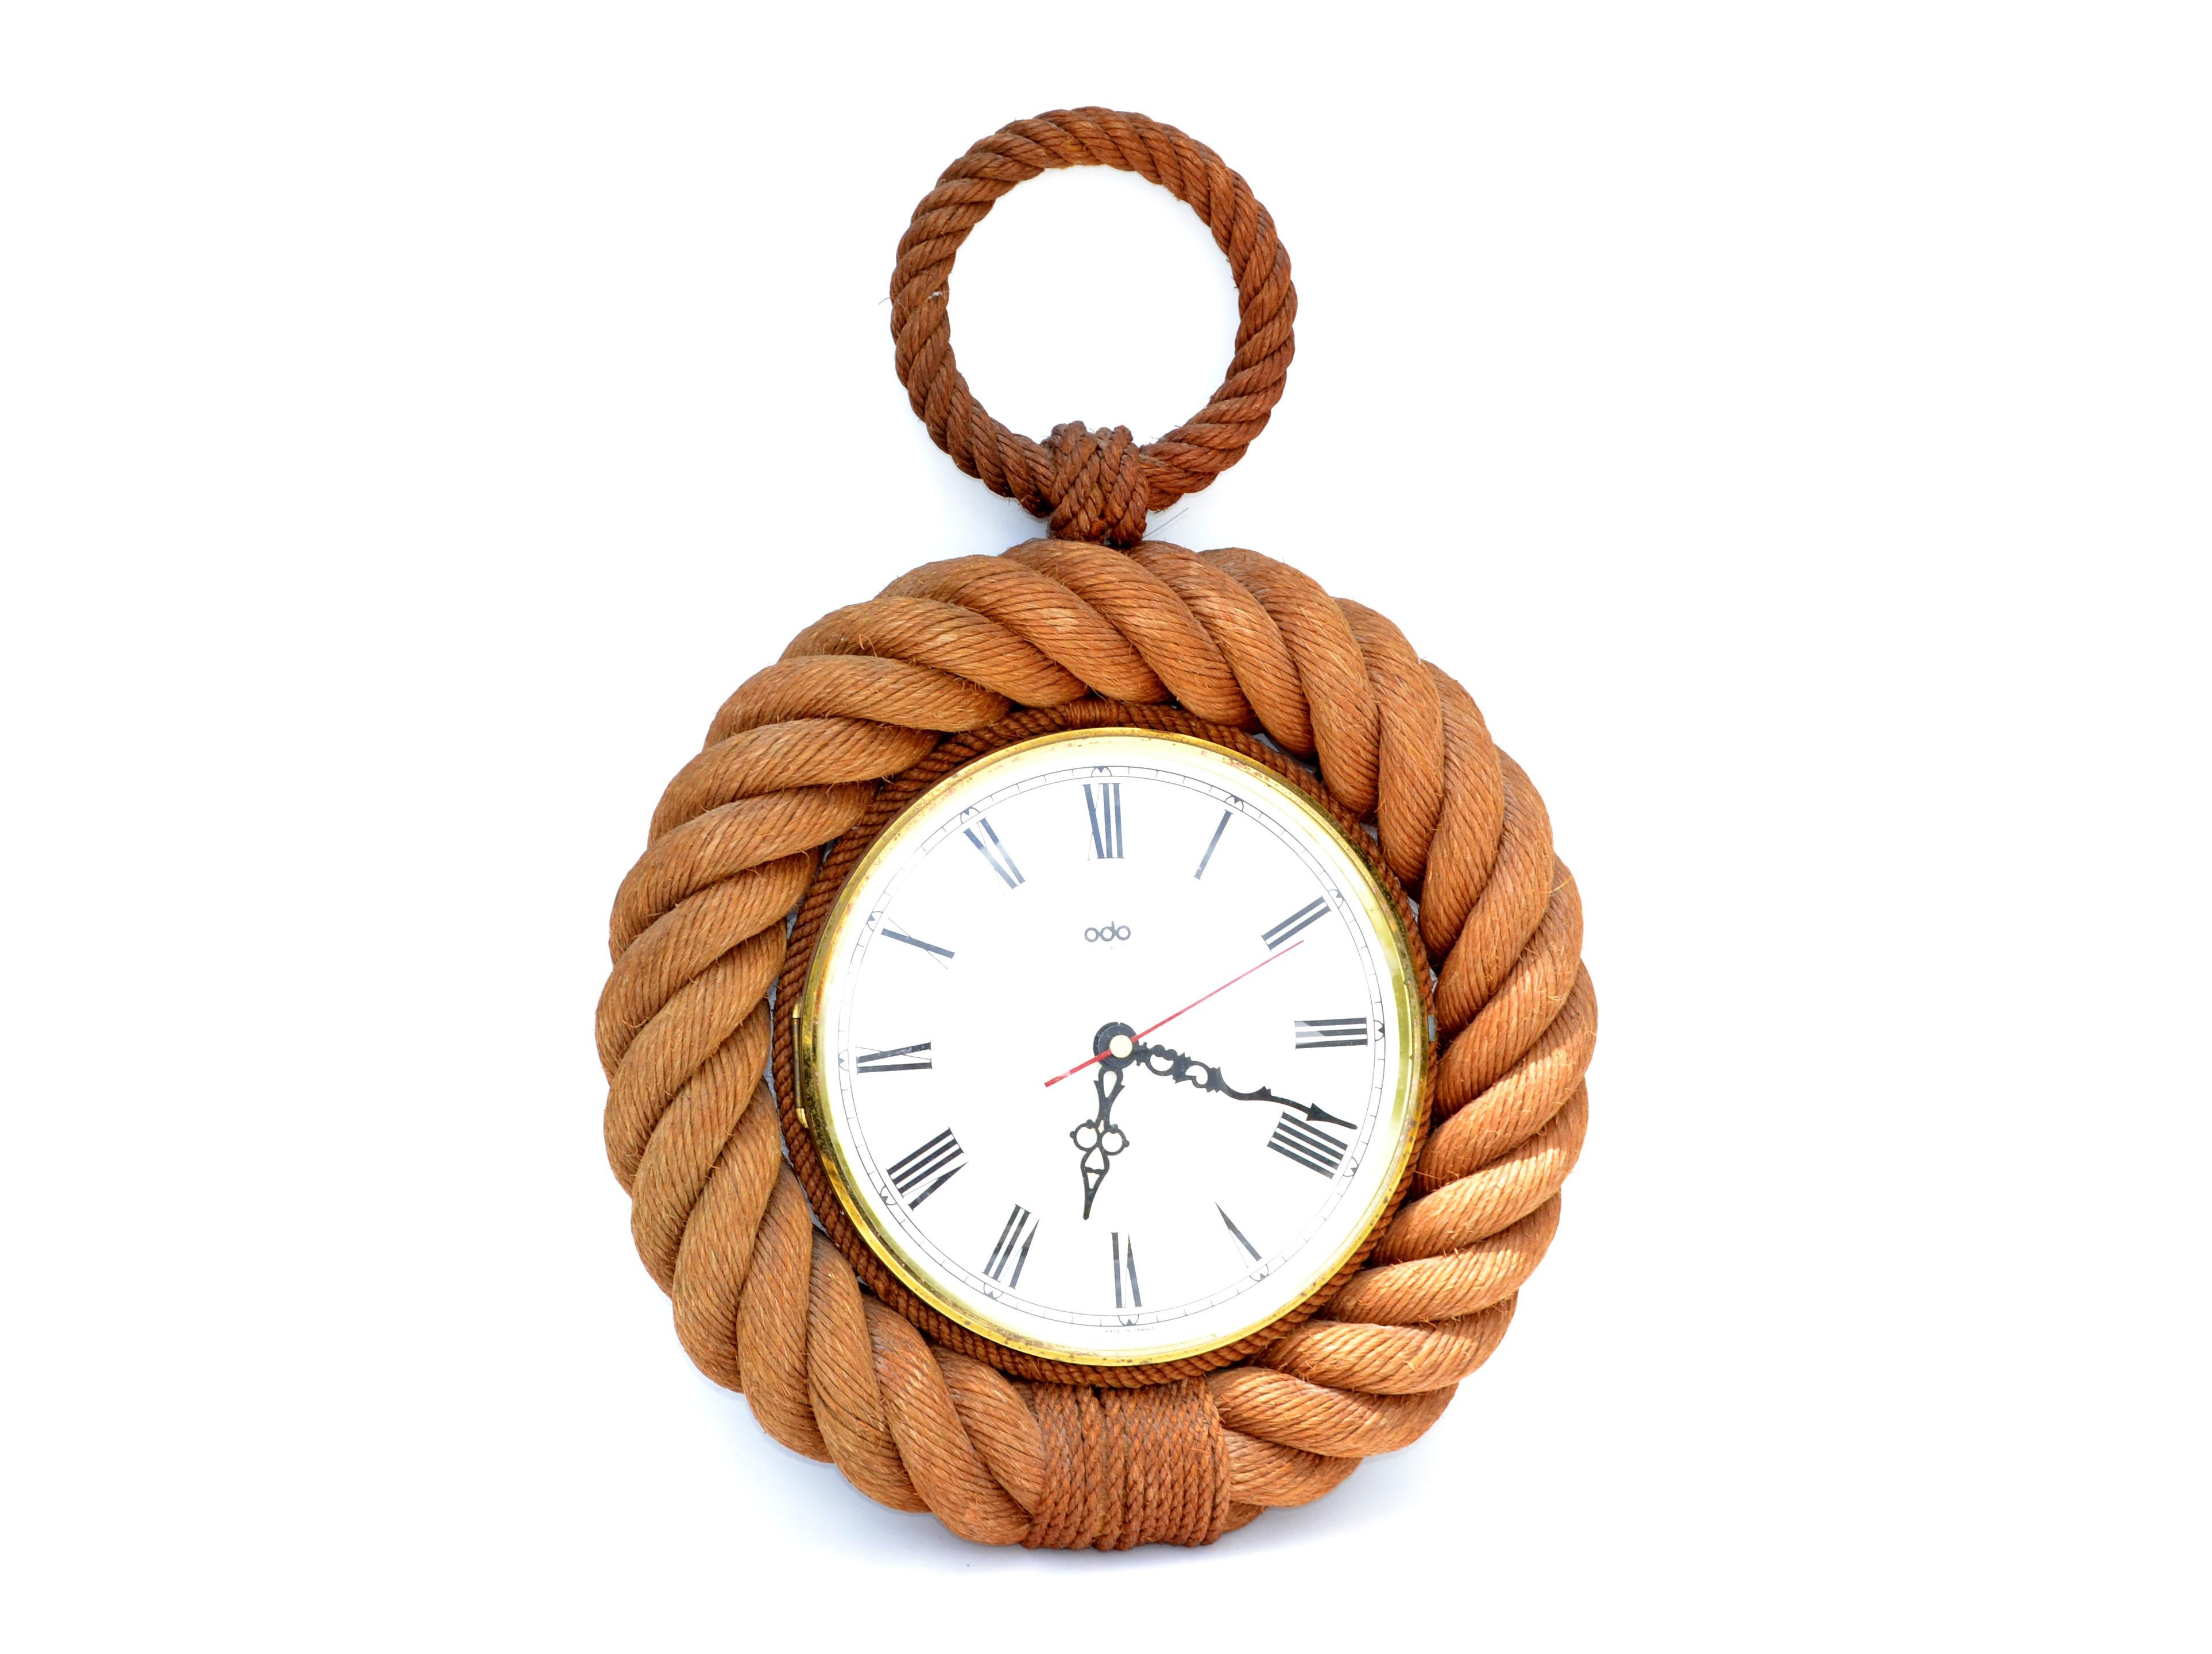 Vintage Audoux Minet style nautical wall rope clock shaped in form of a pocket watch France.
Marked LIC ATO / odo / made in France.
The clock has not been tested.